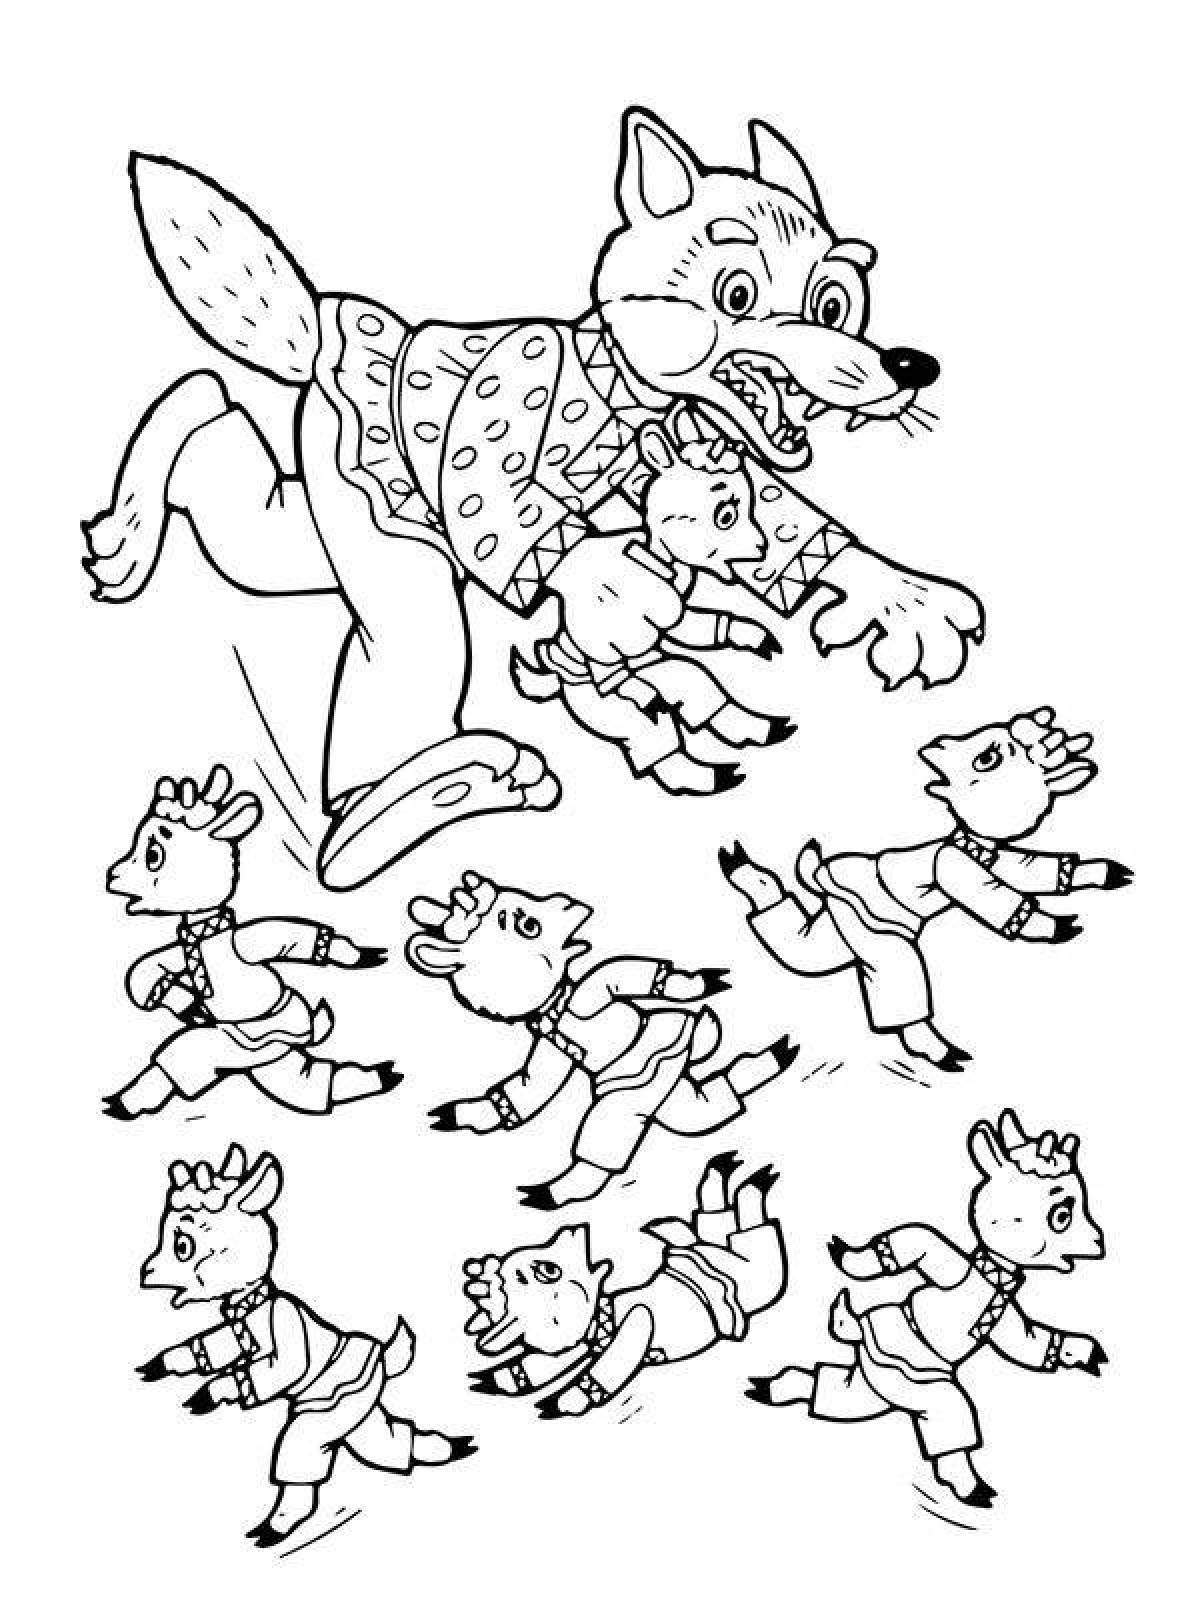 A fascinating coloring book of a fabulous wolf and seven kids